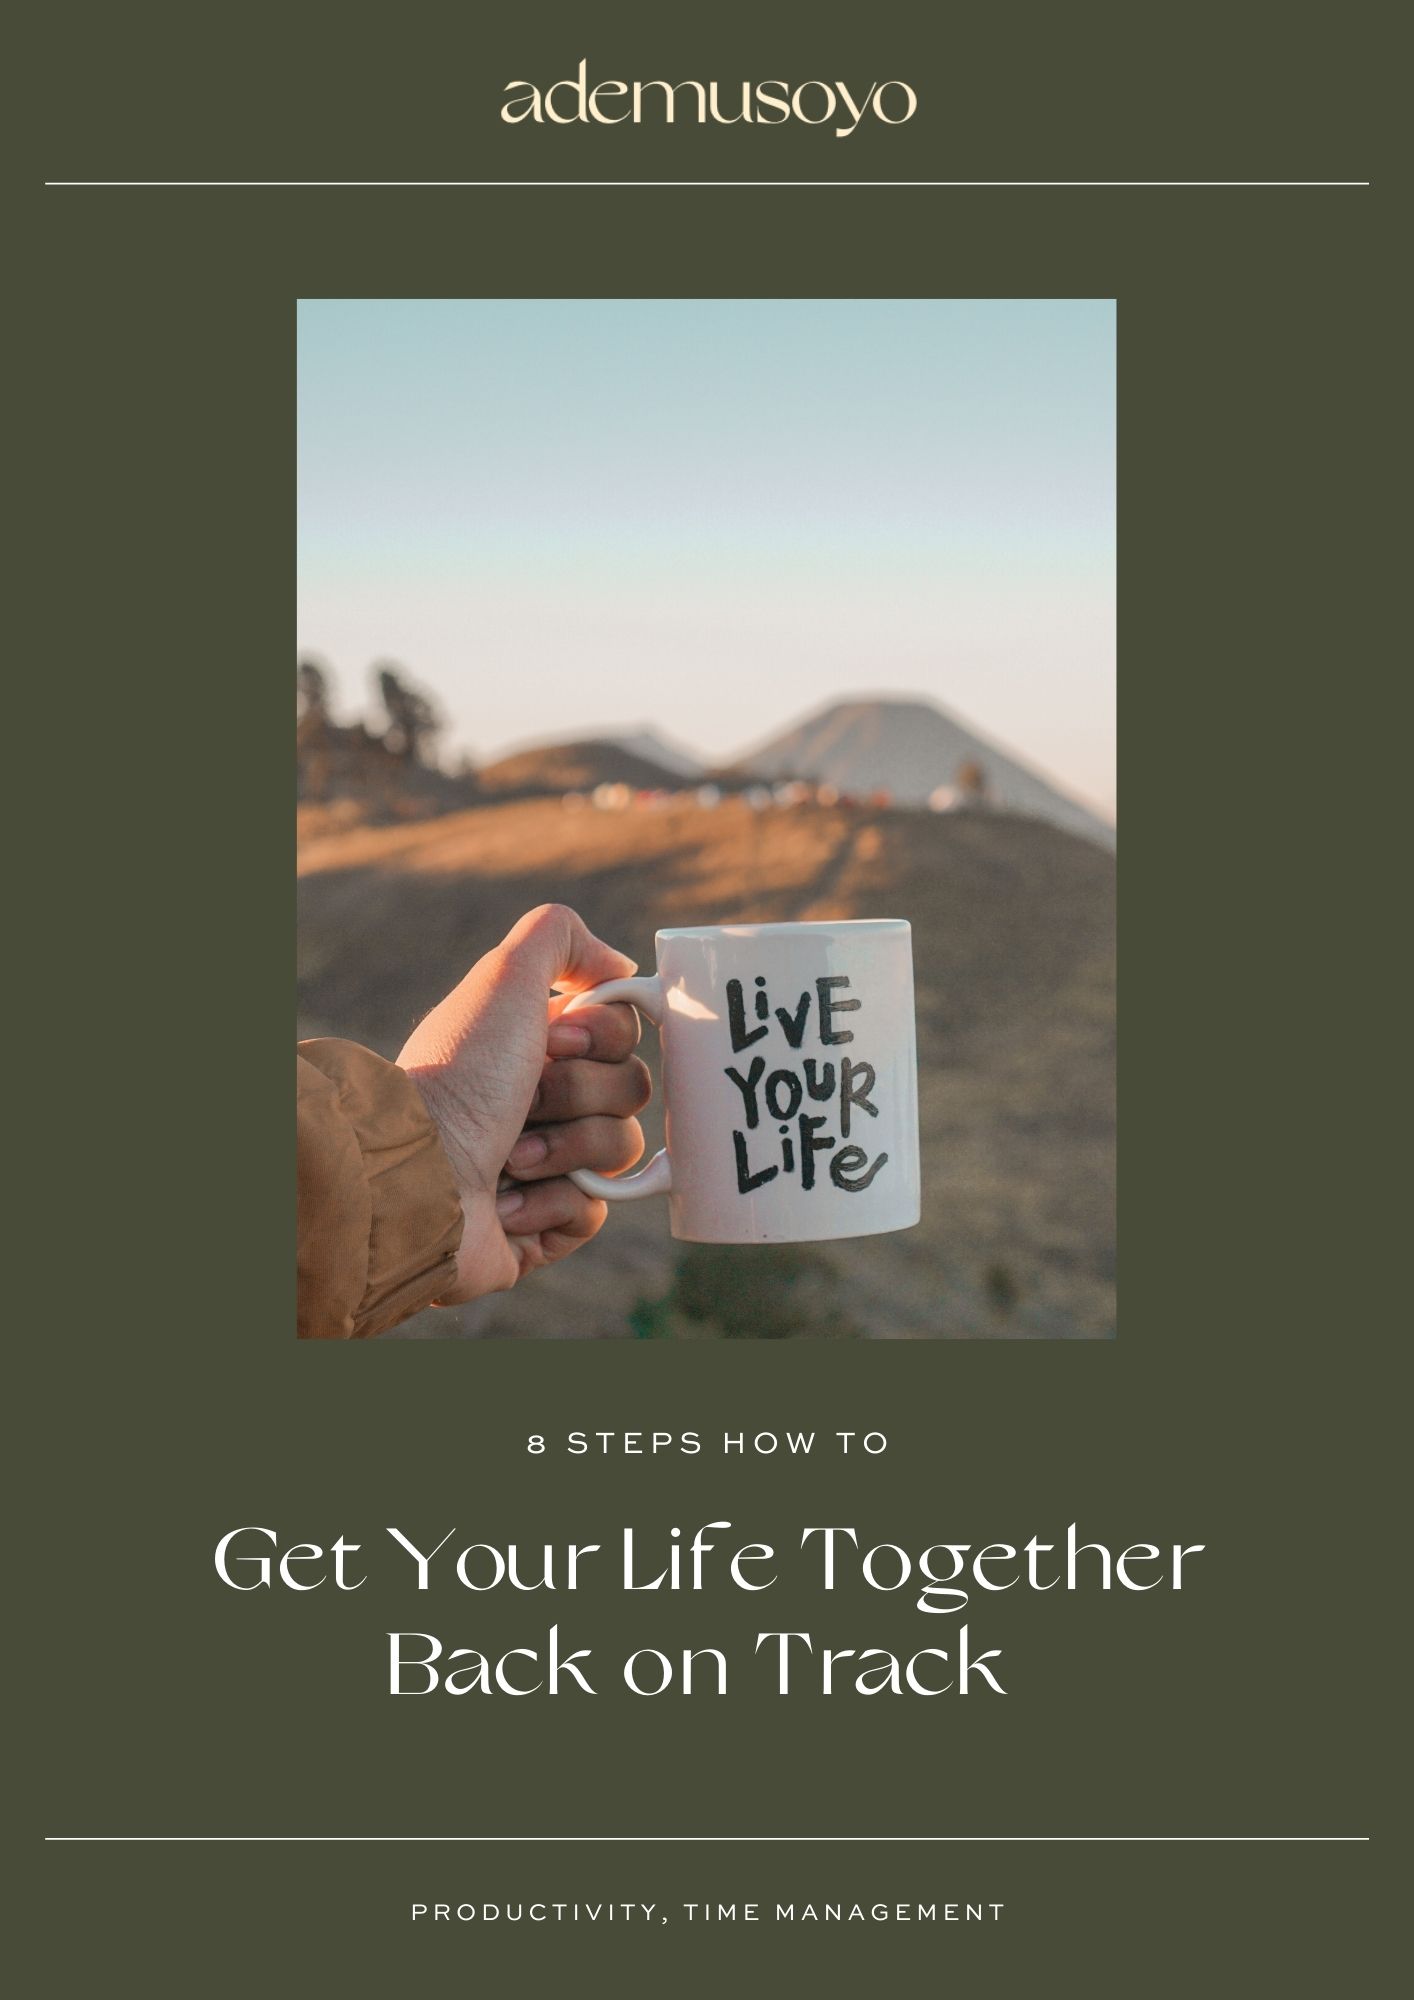 this is a blog feature image that shows an image of a person's hand on a mountainous backdrop holding a mug with a printed text live your life while text overlay at the bottom part on an olive color text box can be read as 8 Steps How To Get Your Life Together Back on Track